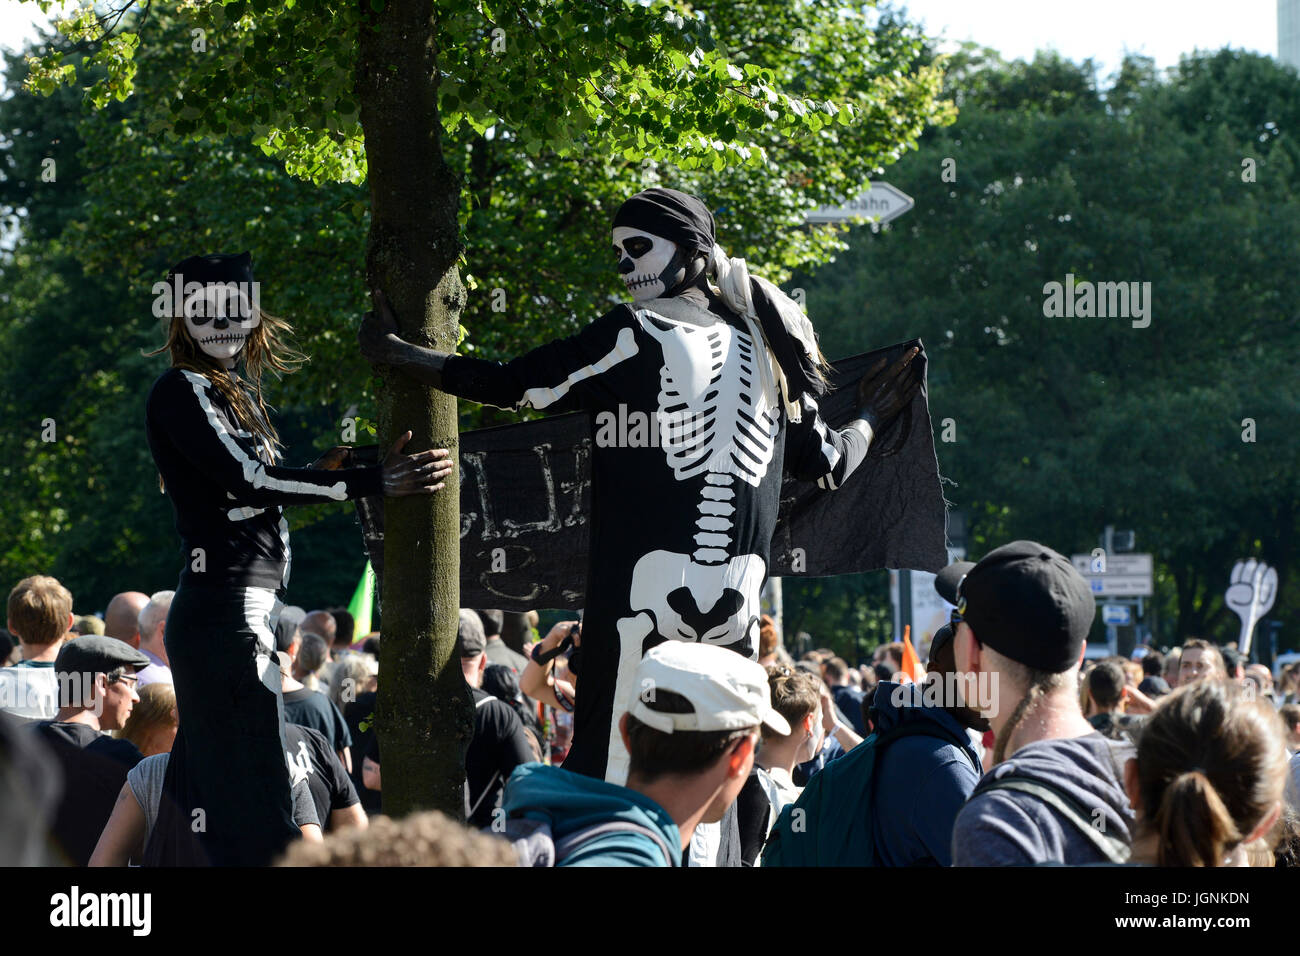 Hamburg, Germany. 8th Jul, 2017. Protest rally on St. Pauli against G-20 summit in July 2017, protester in skeleton costume,  Credit: Joerg Boethling/Alamy Live News Stock Photo